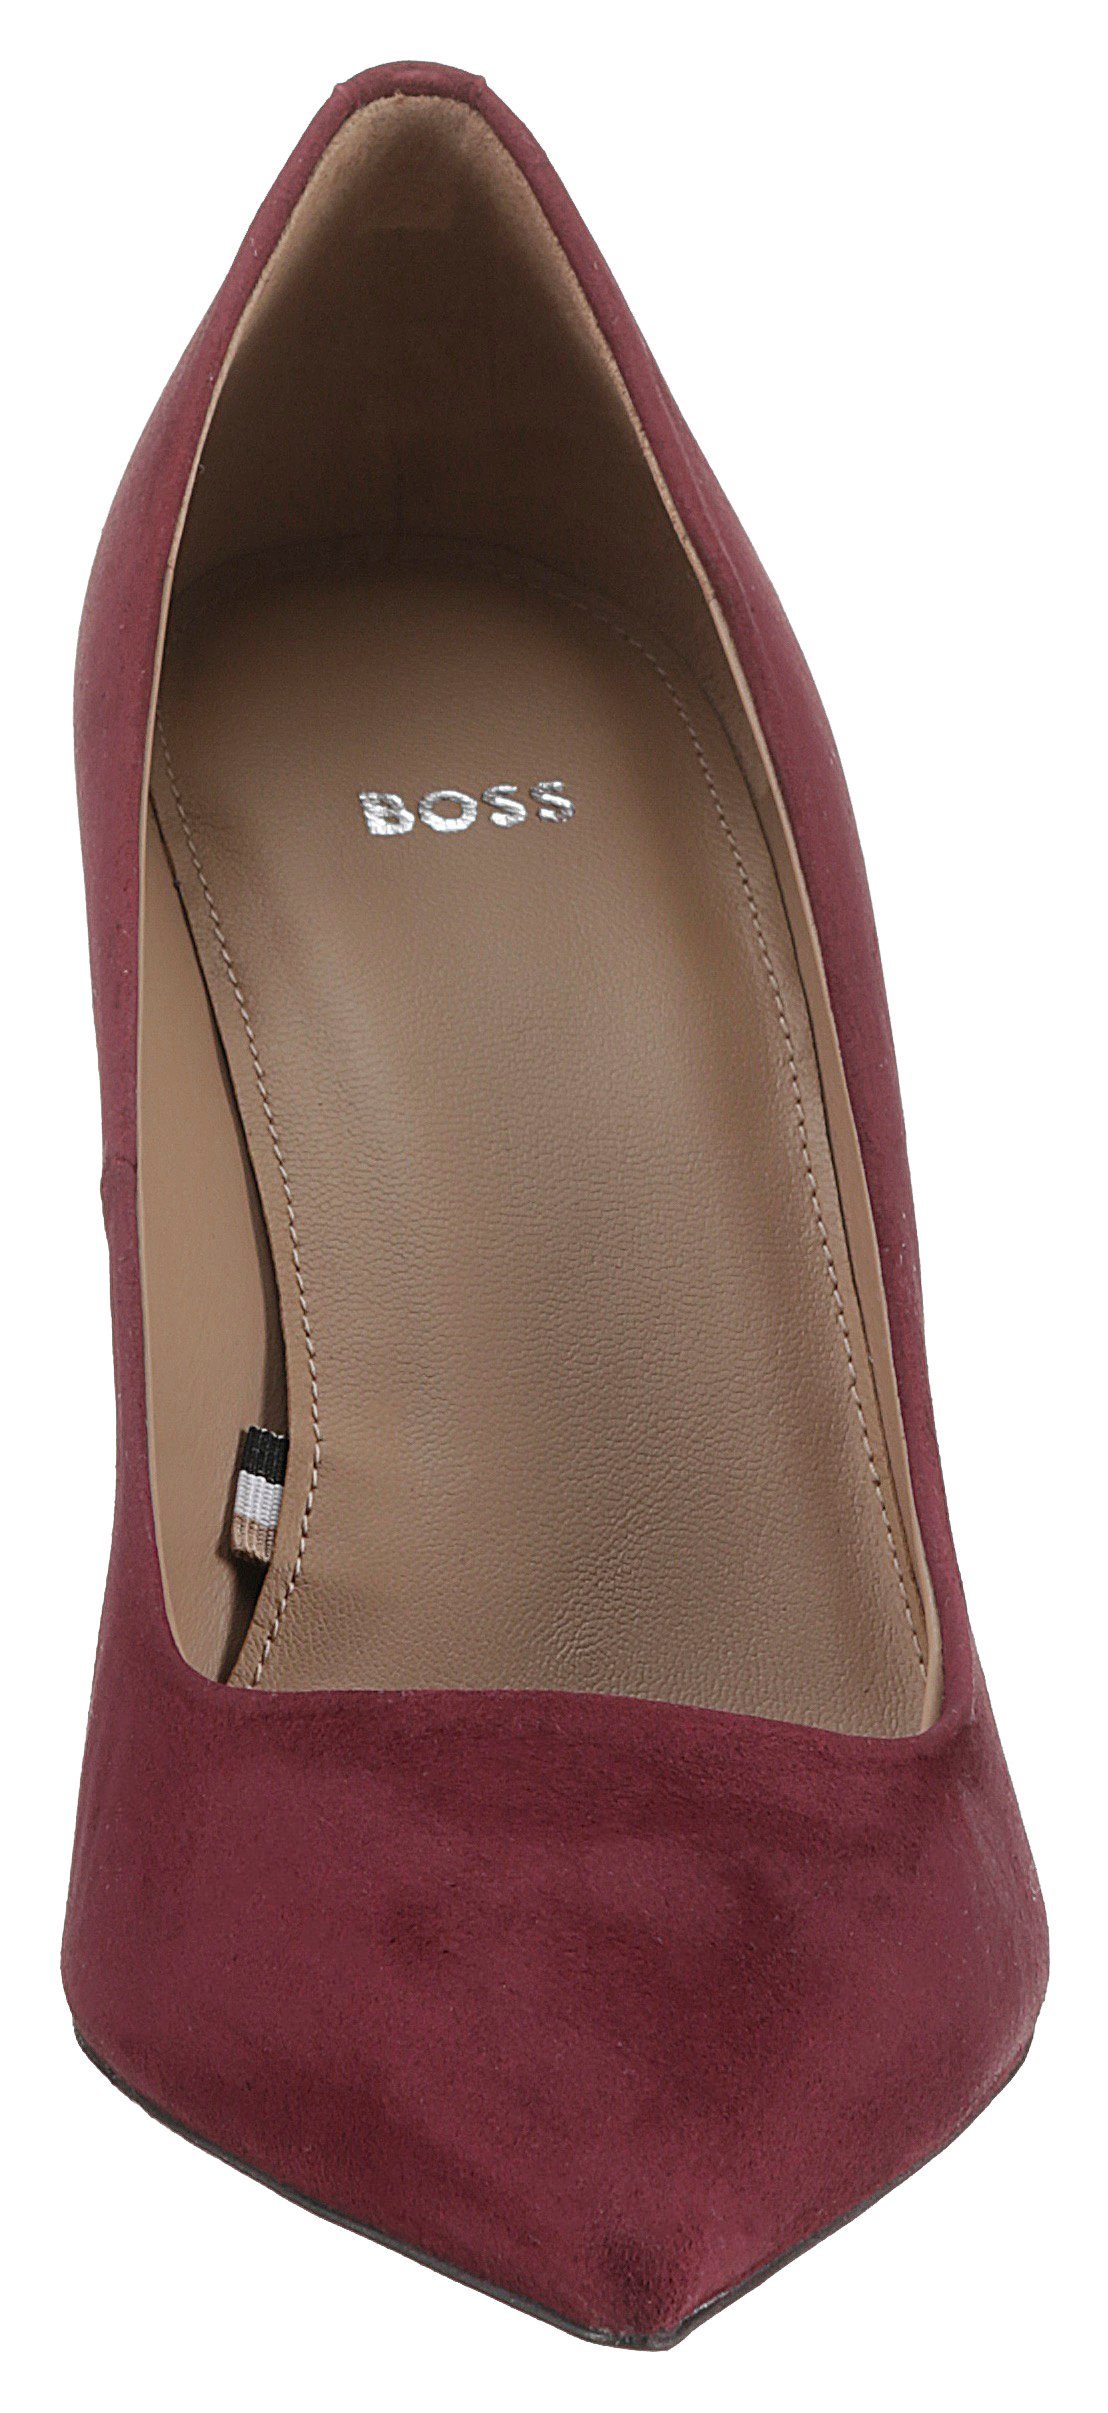 Janet spitzer Form BOSS in Pumps